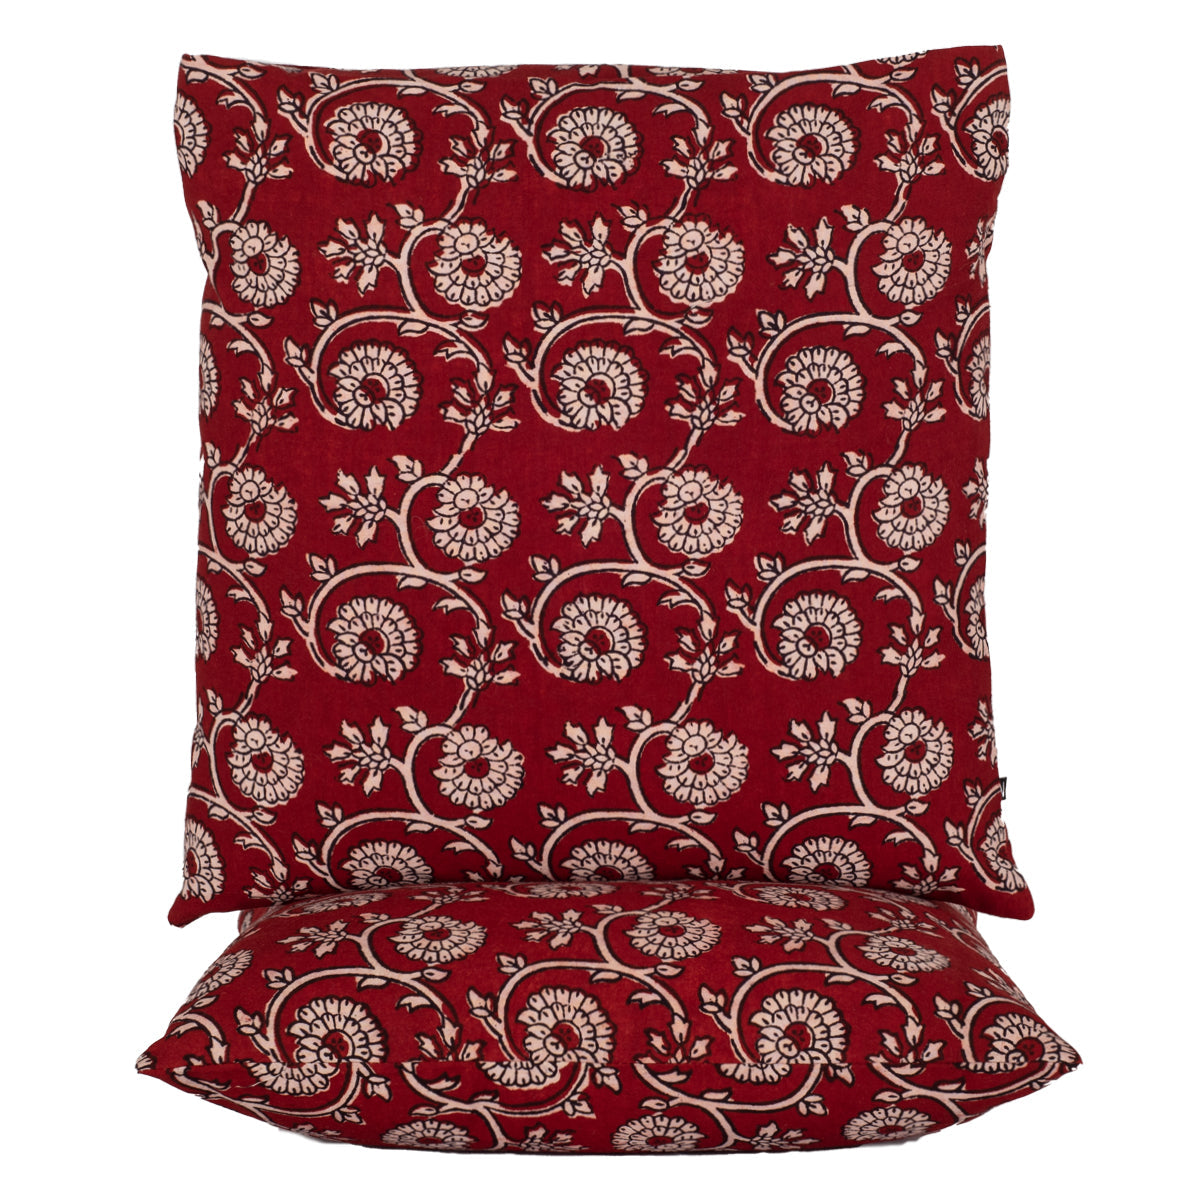 Floral Vine Bagh Hand Block Print Cotton Cushion Cover - Red-1